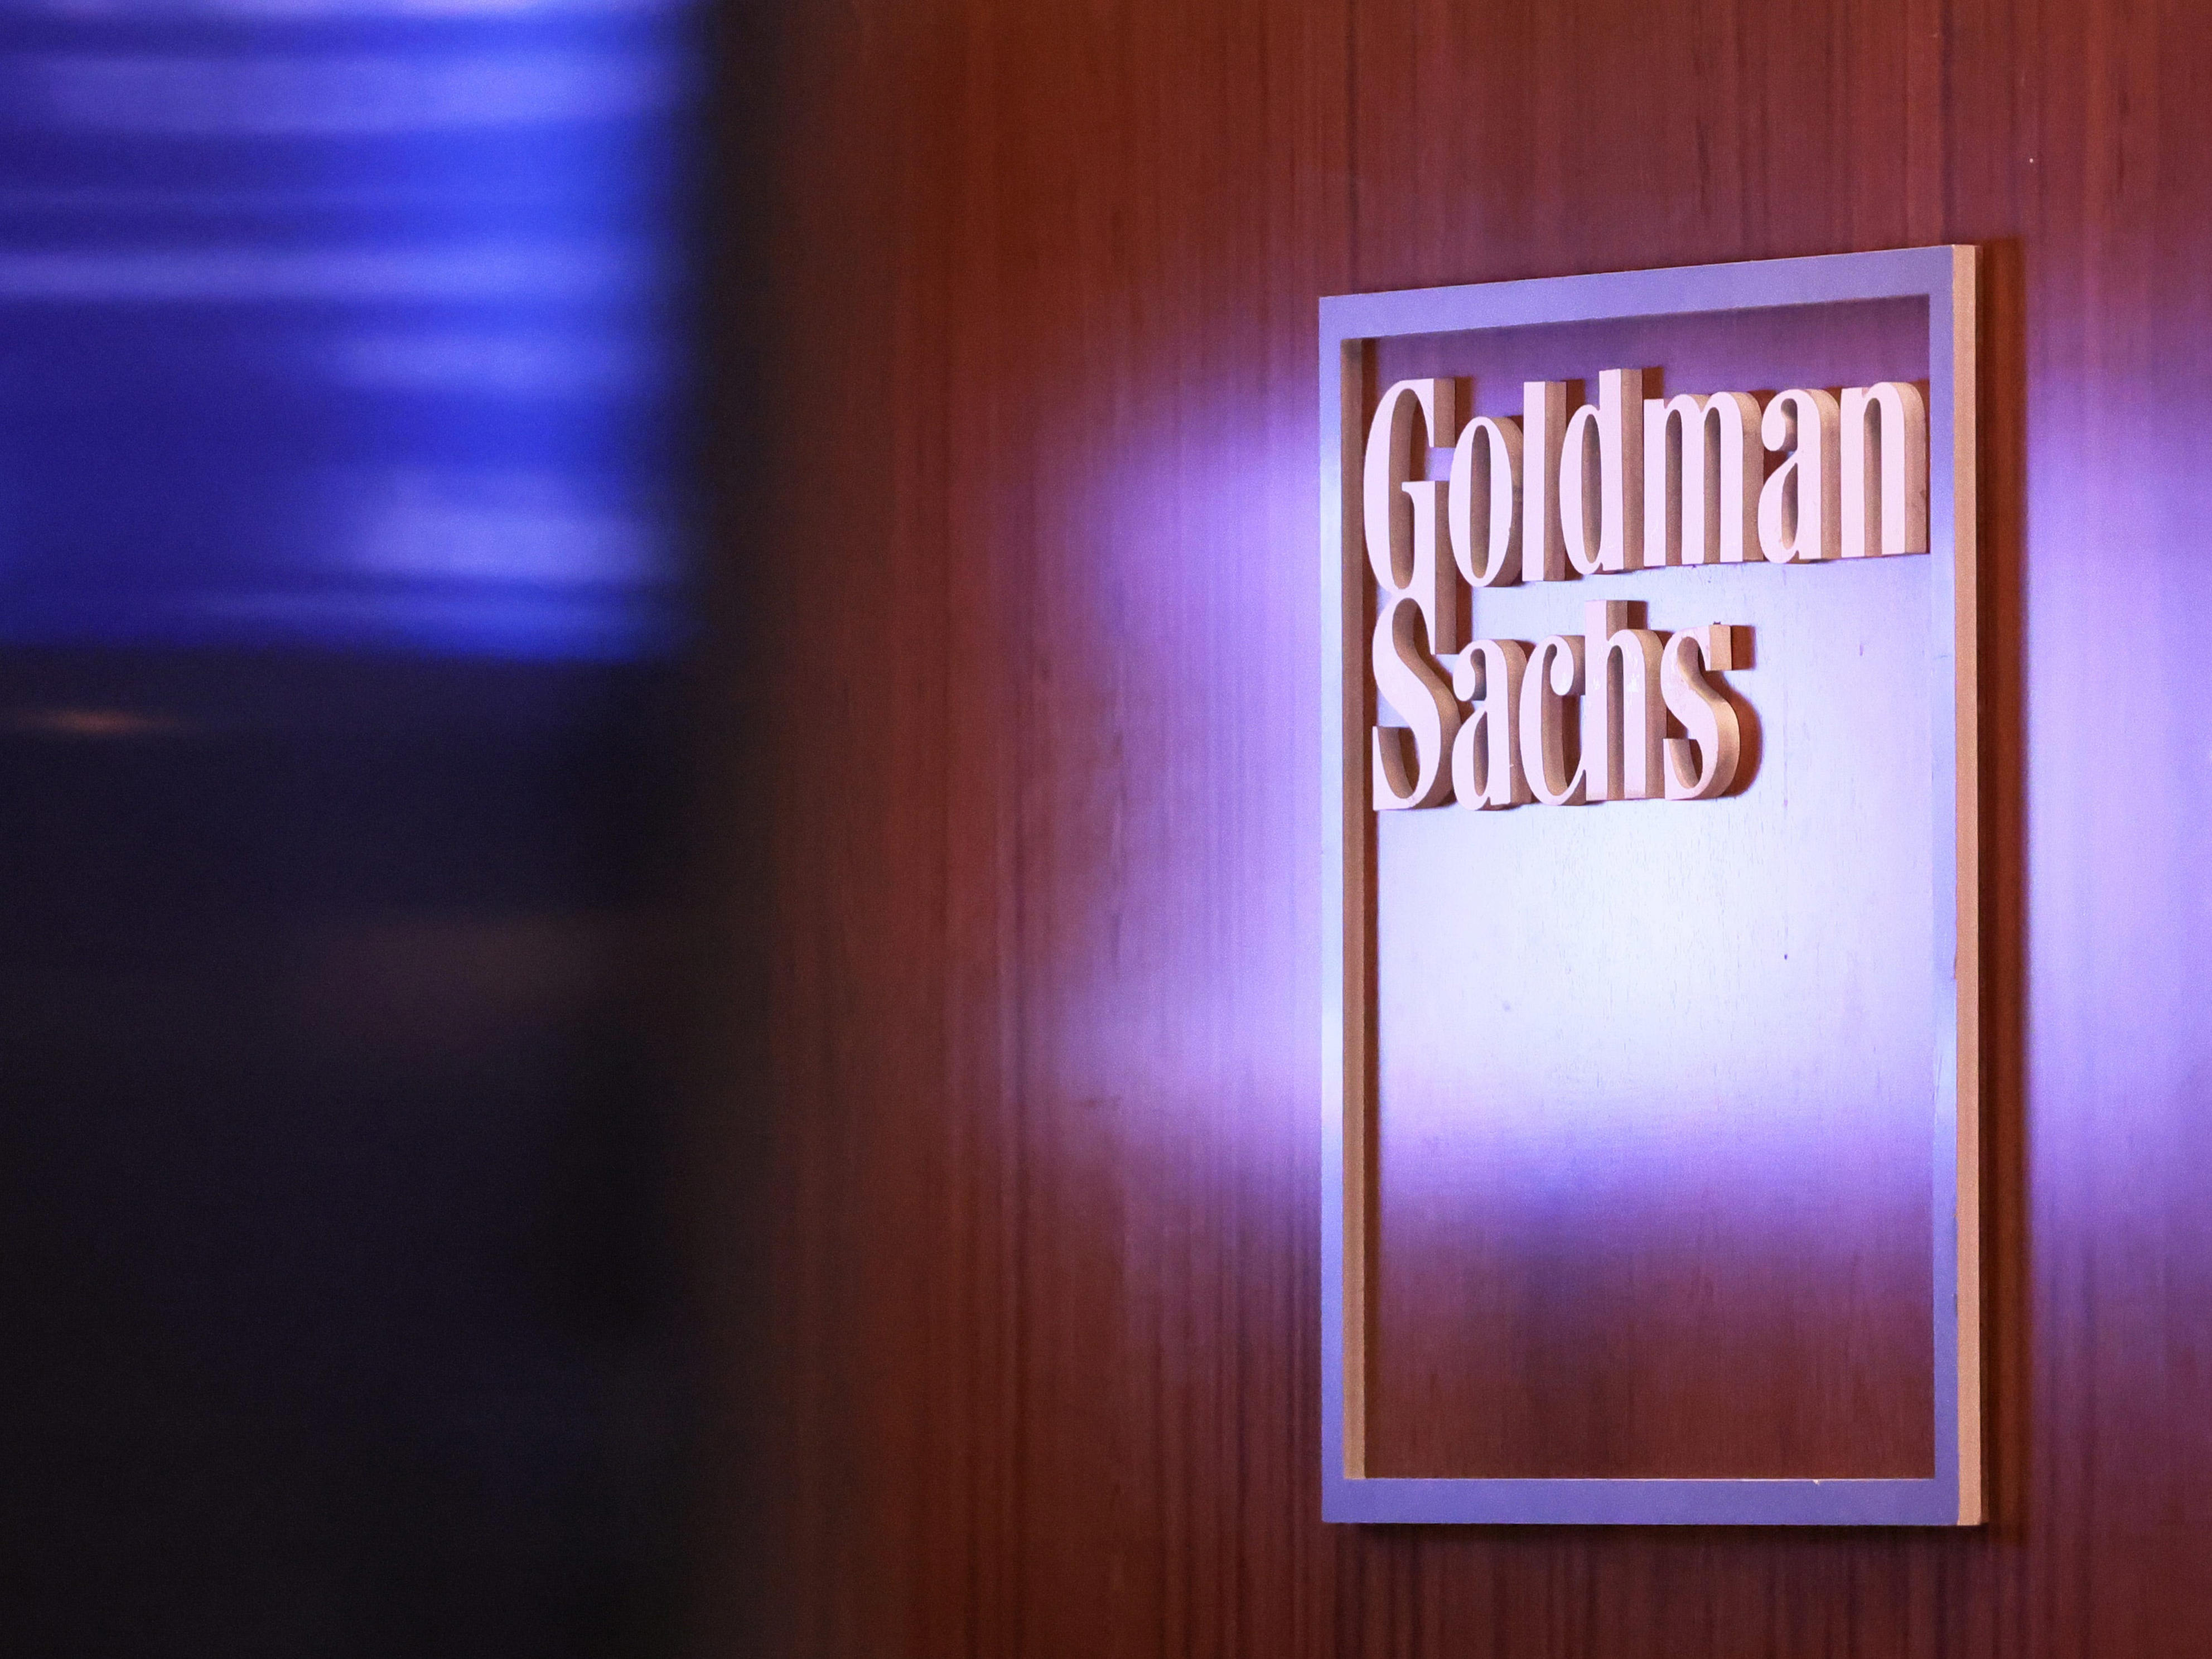 <p>Goldman Sachs is expected to layoff up to 8% of its staff in the first half of January, a person familiar with the matter <a href="https://www.businessinsider.com/goldman-sachs-layoffs-job-cuts-up-to-8-percent-2022-12">told Insider in December.</a> </p><p>The cost-cutting efforts from the investment banking giant mirrors reductions from competitors including Morgan Stanley and Citi, which also laid off employees in 2022. </p><p>"We continue to see headwinds on our expense lines, particularly in the near term," Goldman Sachs CEO David Solomon said at a conference last month. "We've set in motion certain expense mitigation plans, but it will take some time to realize the benefits. Ultimately, we will remain nimble and we will size the firm to reflect the opportunity set."</p>